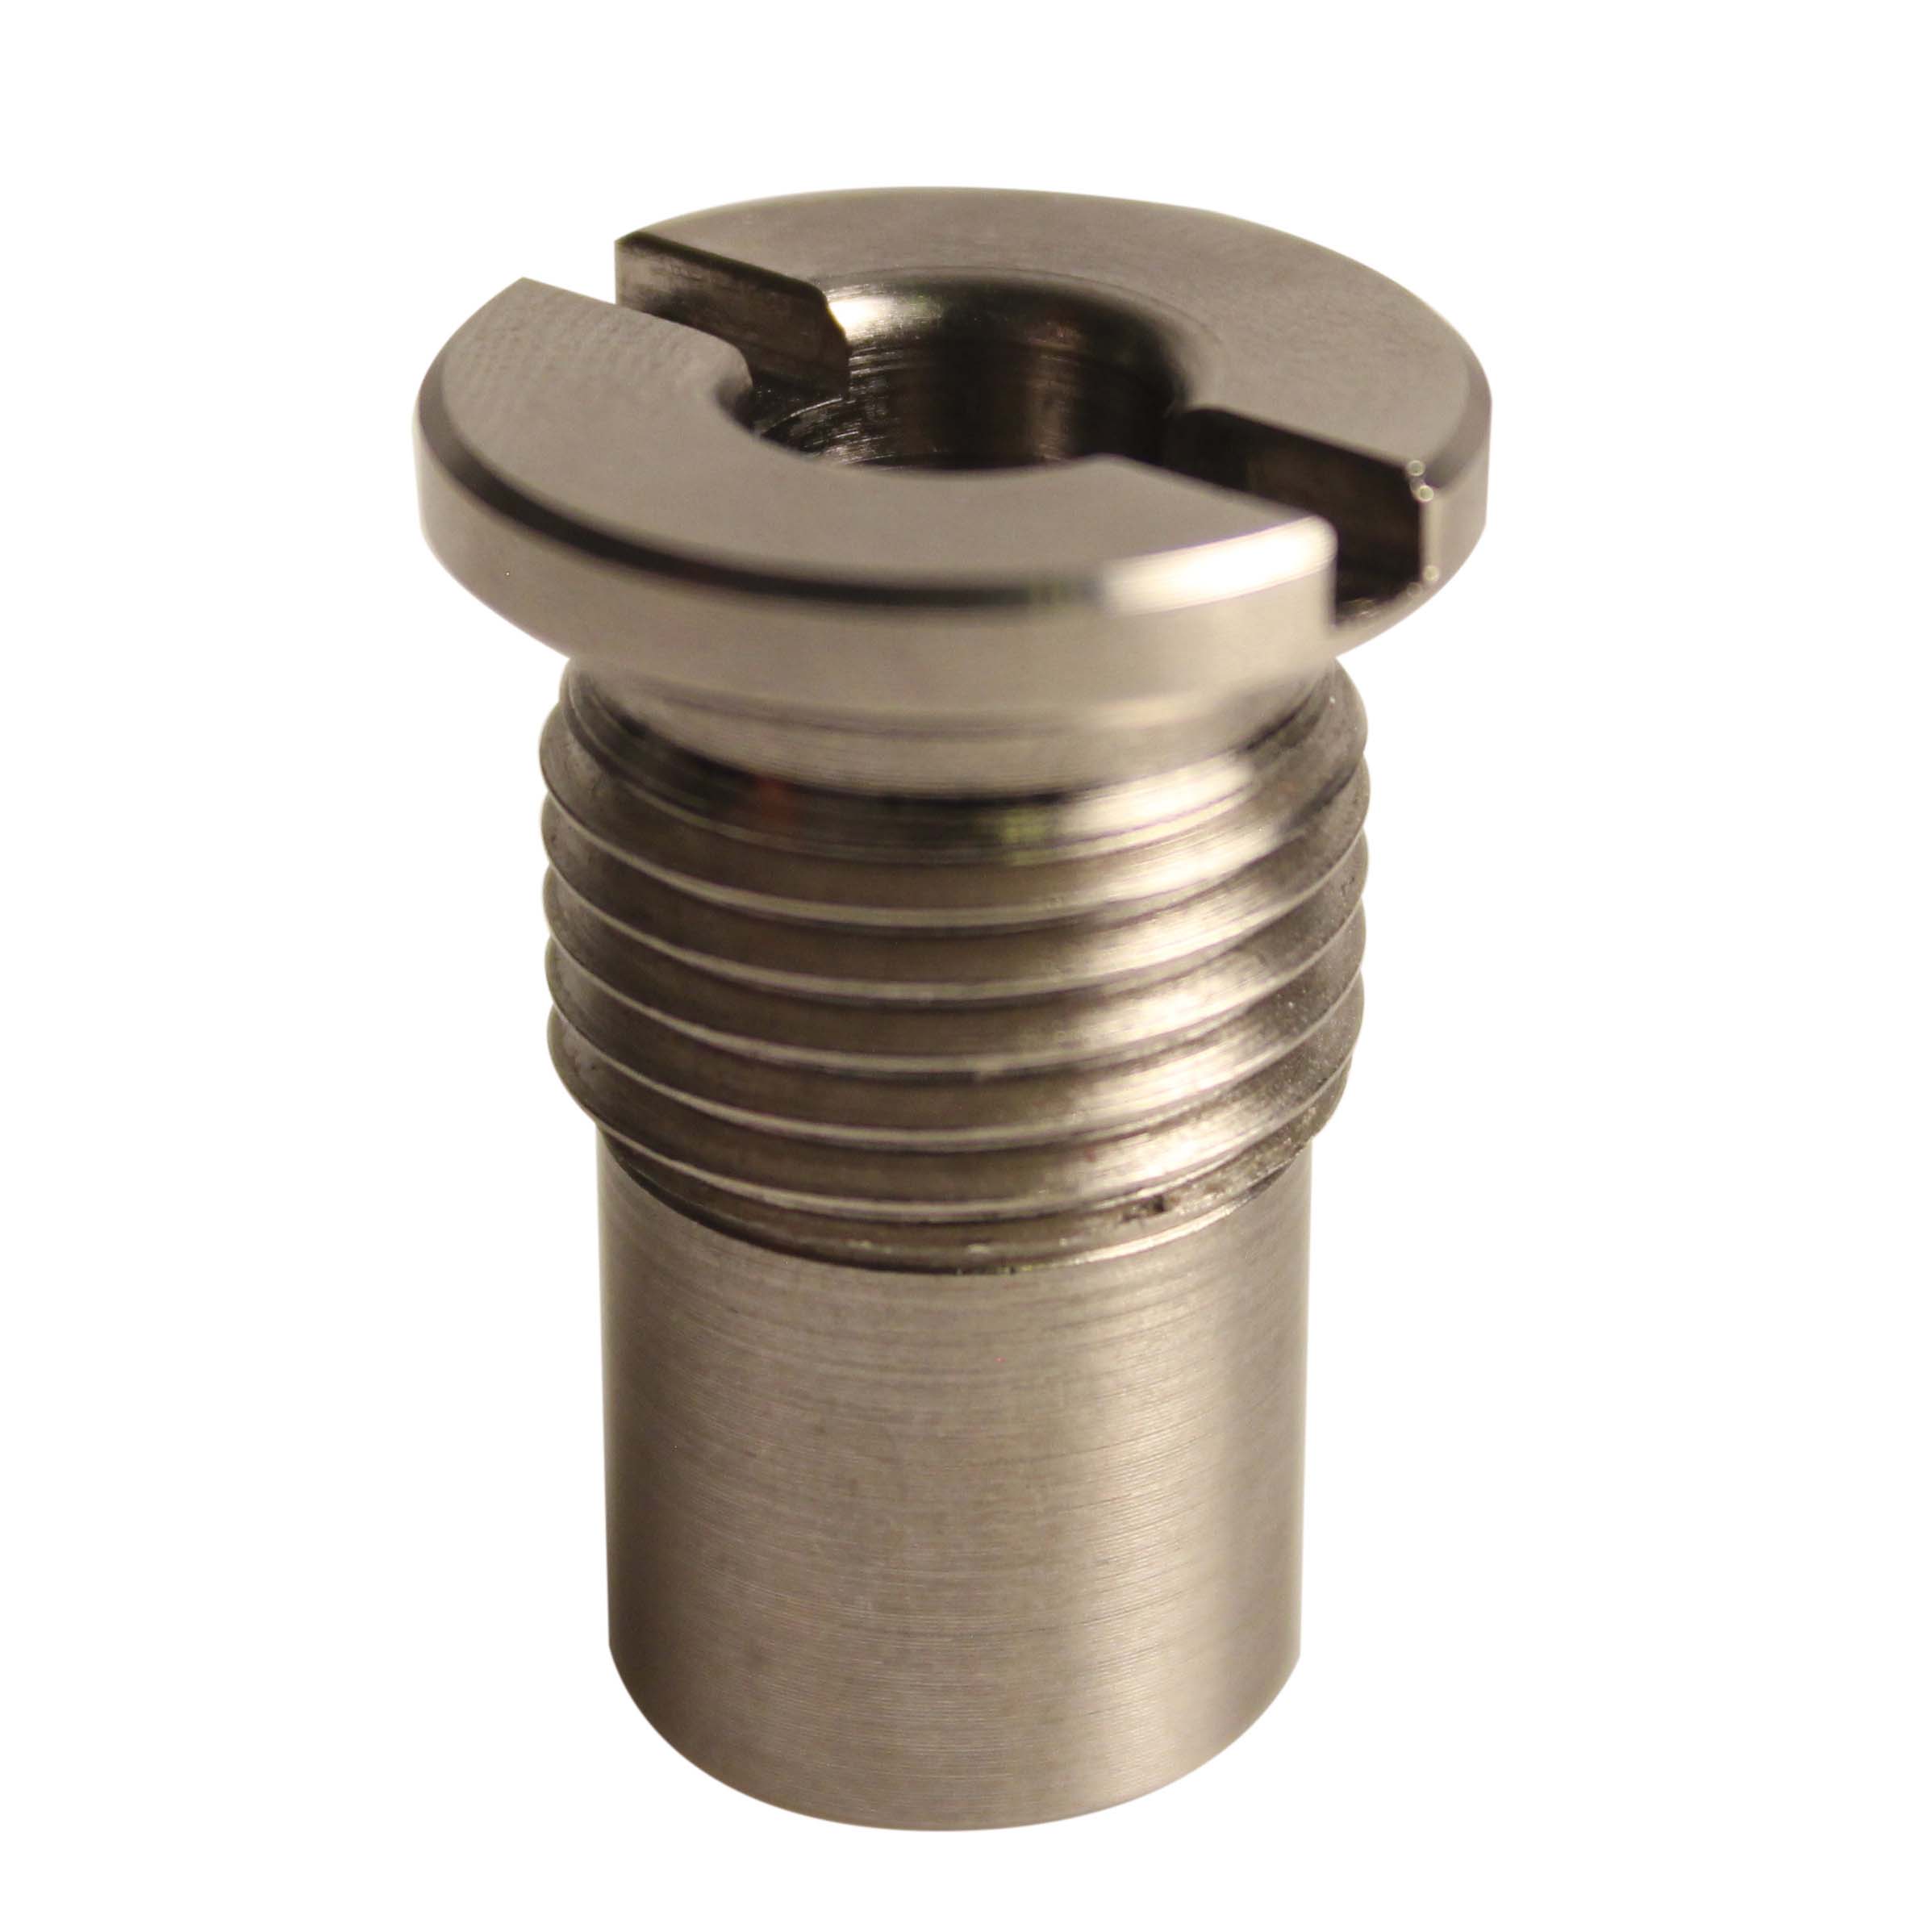 Locking pin for bushes - Nickel-plated steel - +180°C - 